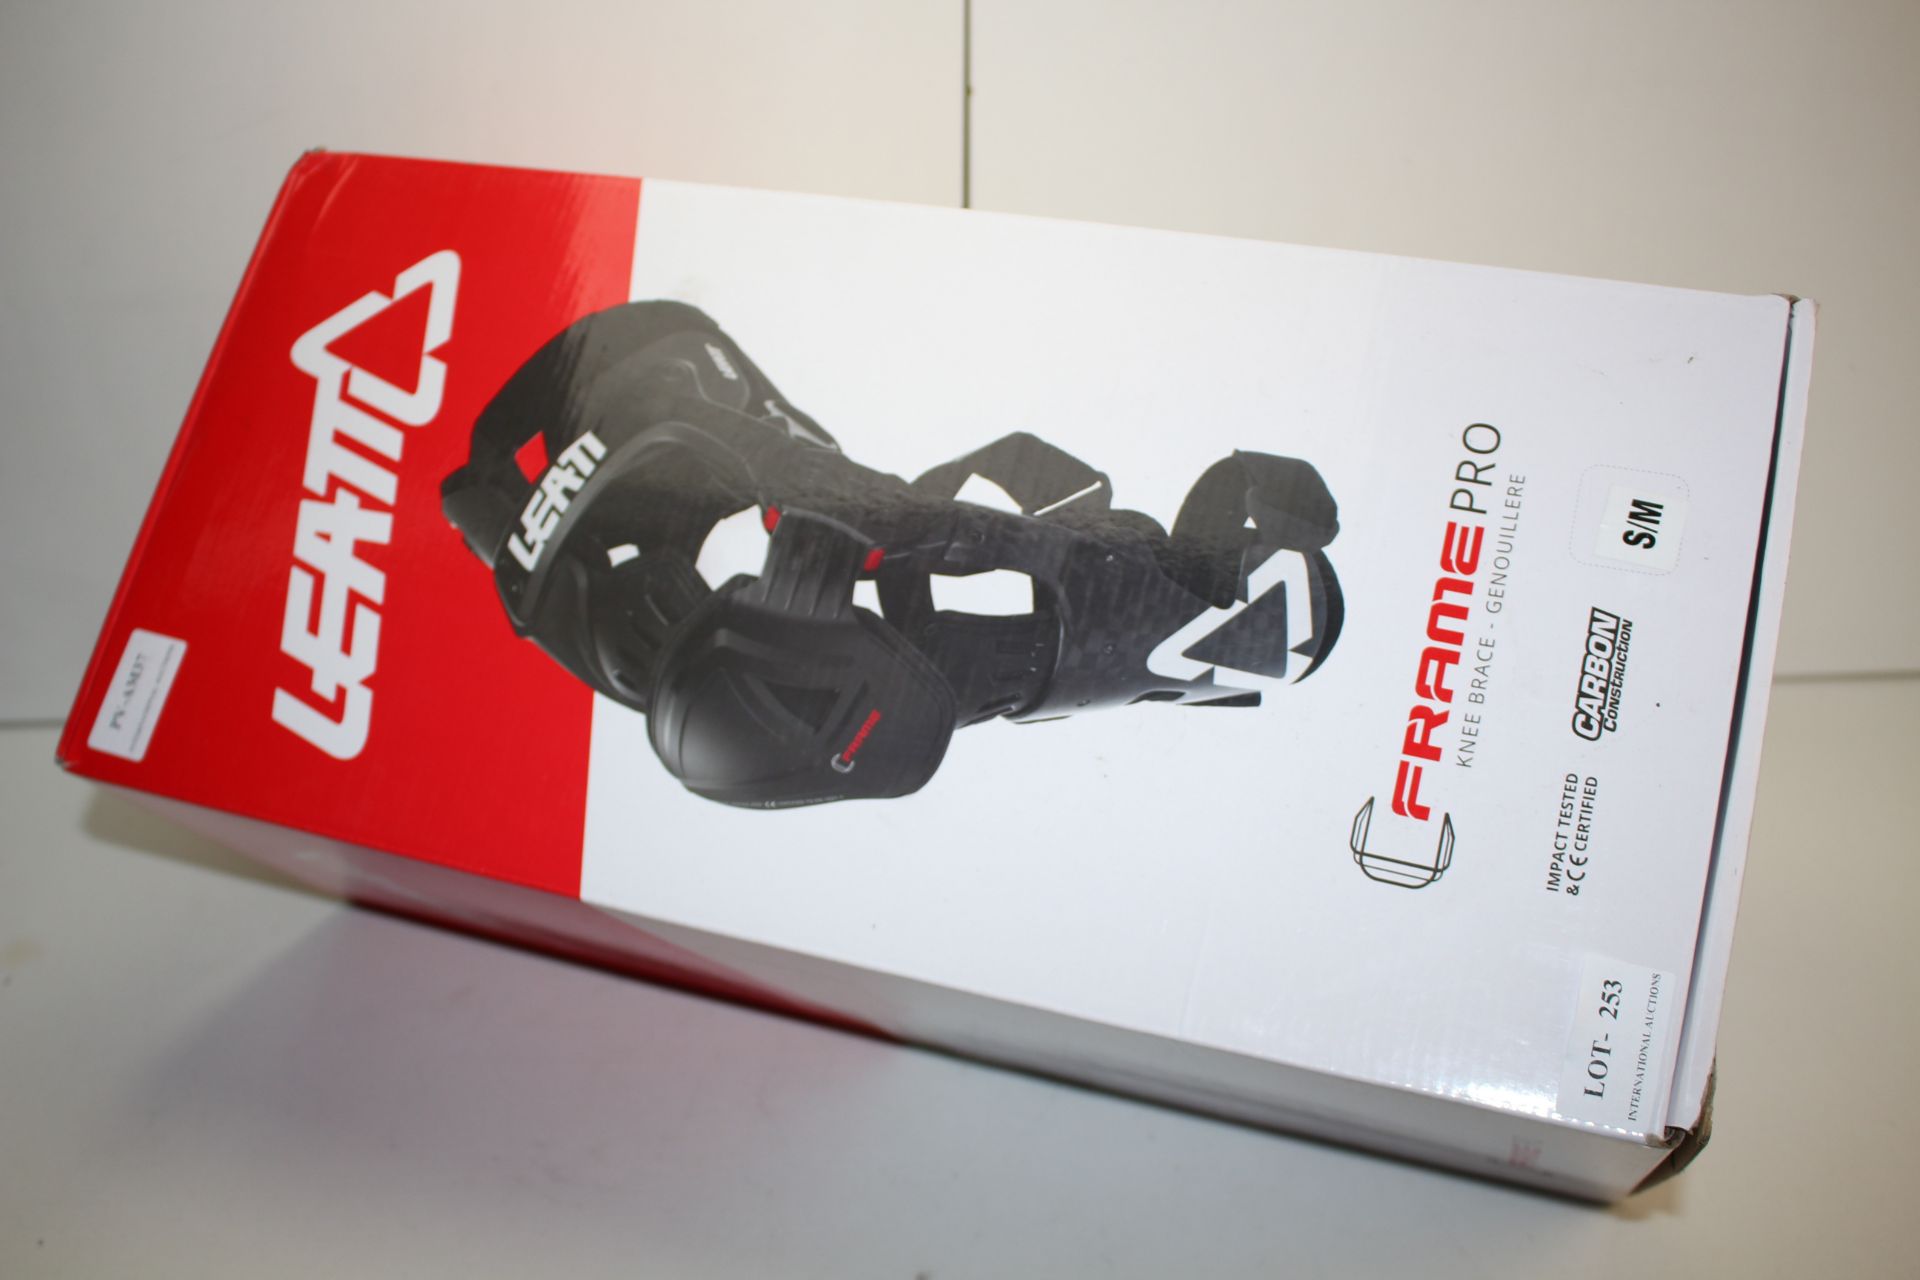 BOXED LEATT FRAME PRO KNEE BRACE CERTIFIED MEDICAL PRODUCT - CARBON CONSTRUCTION RRP £422.